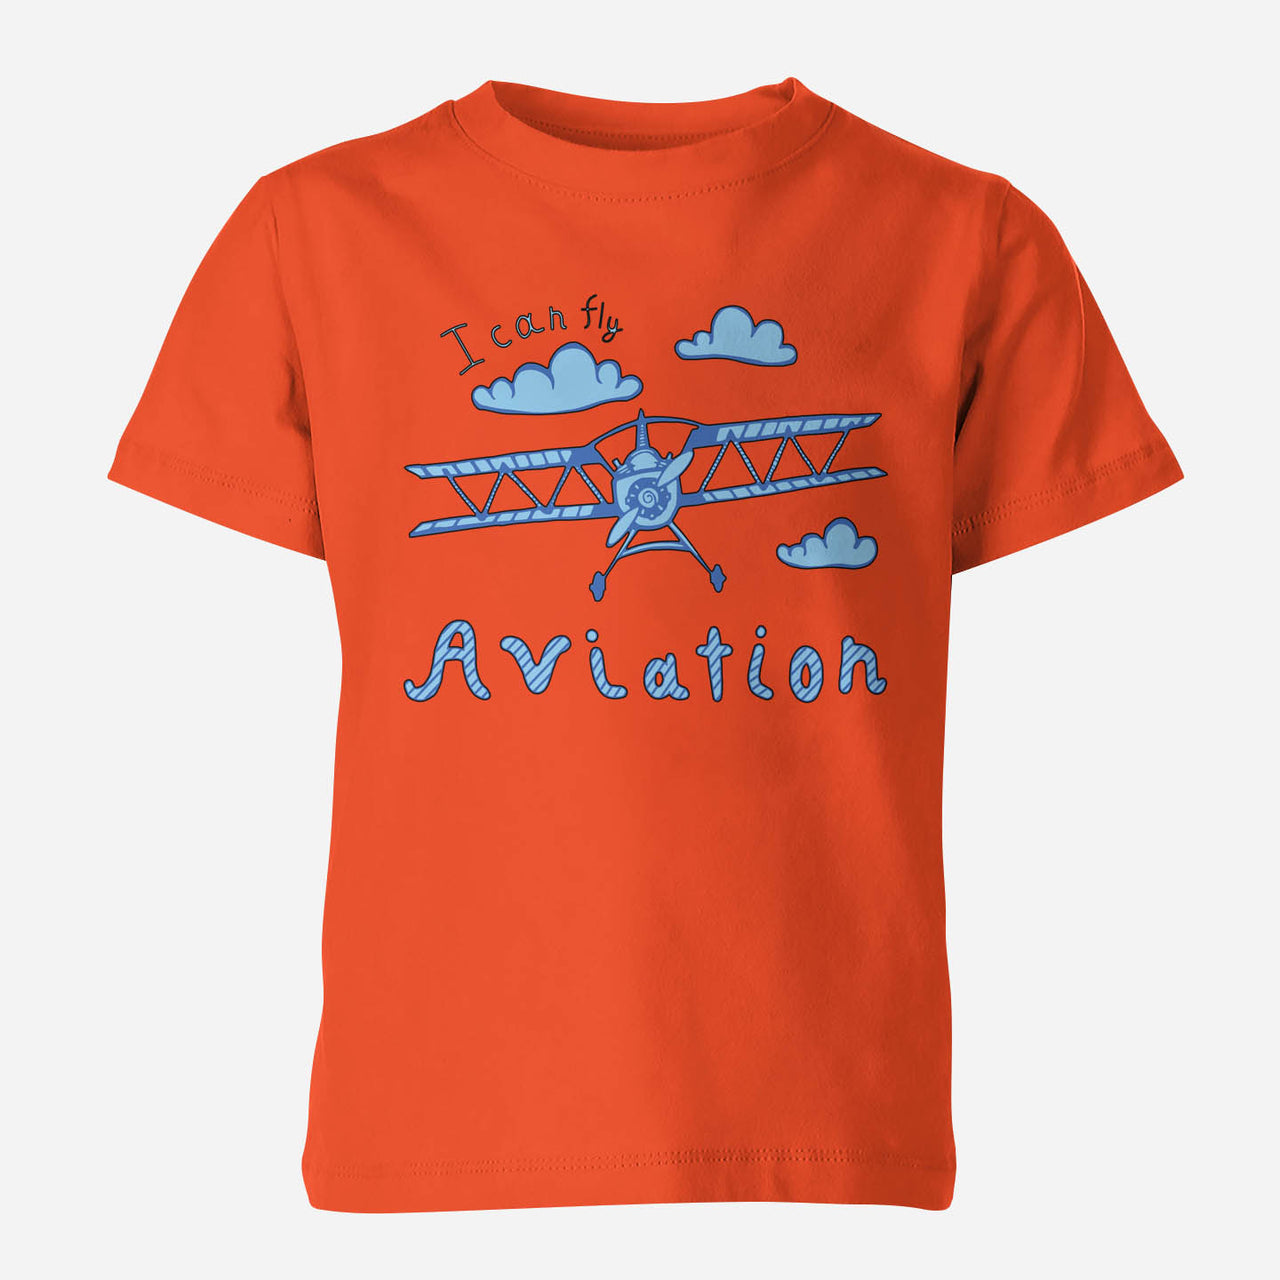 I Can Fly & Aviation Designed Children T-Shirts